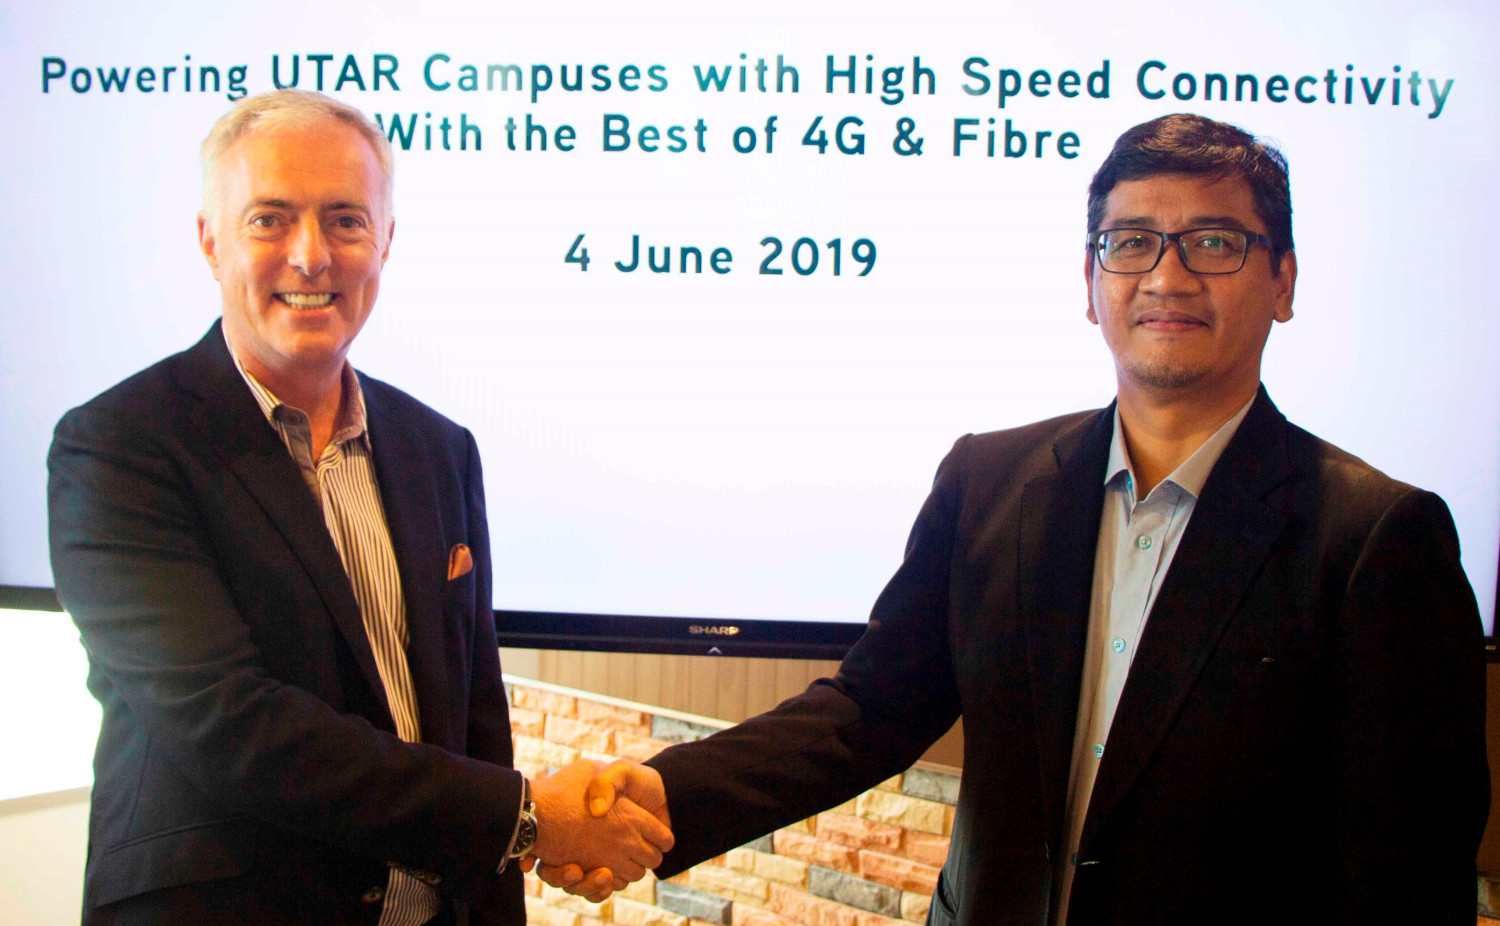 UTAR is now connected by Maxis with high-speed fibre internet and mobile coverage offered campus-wide